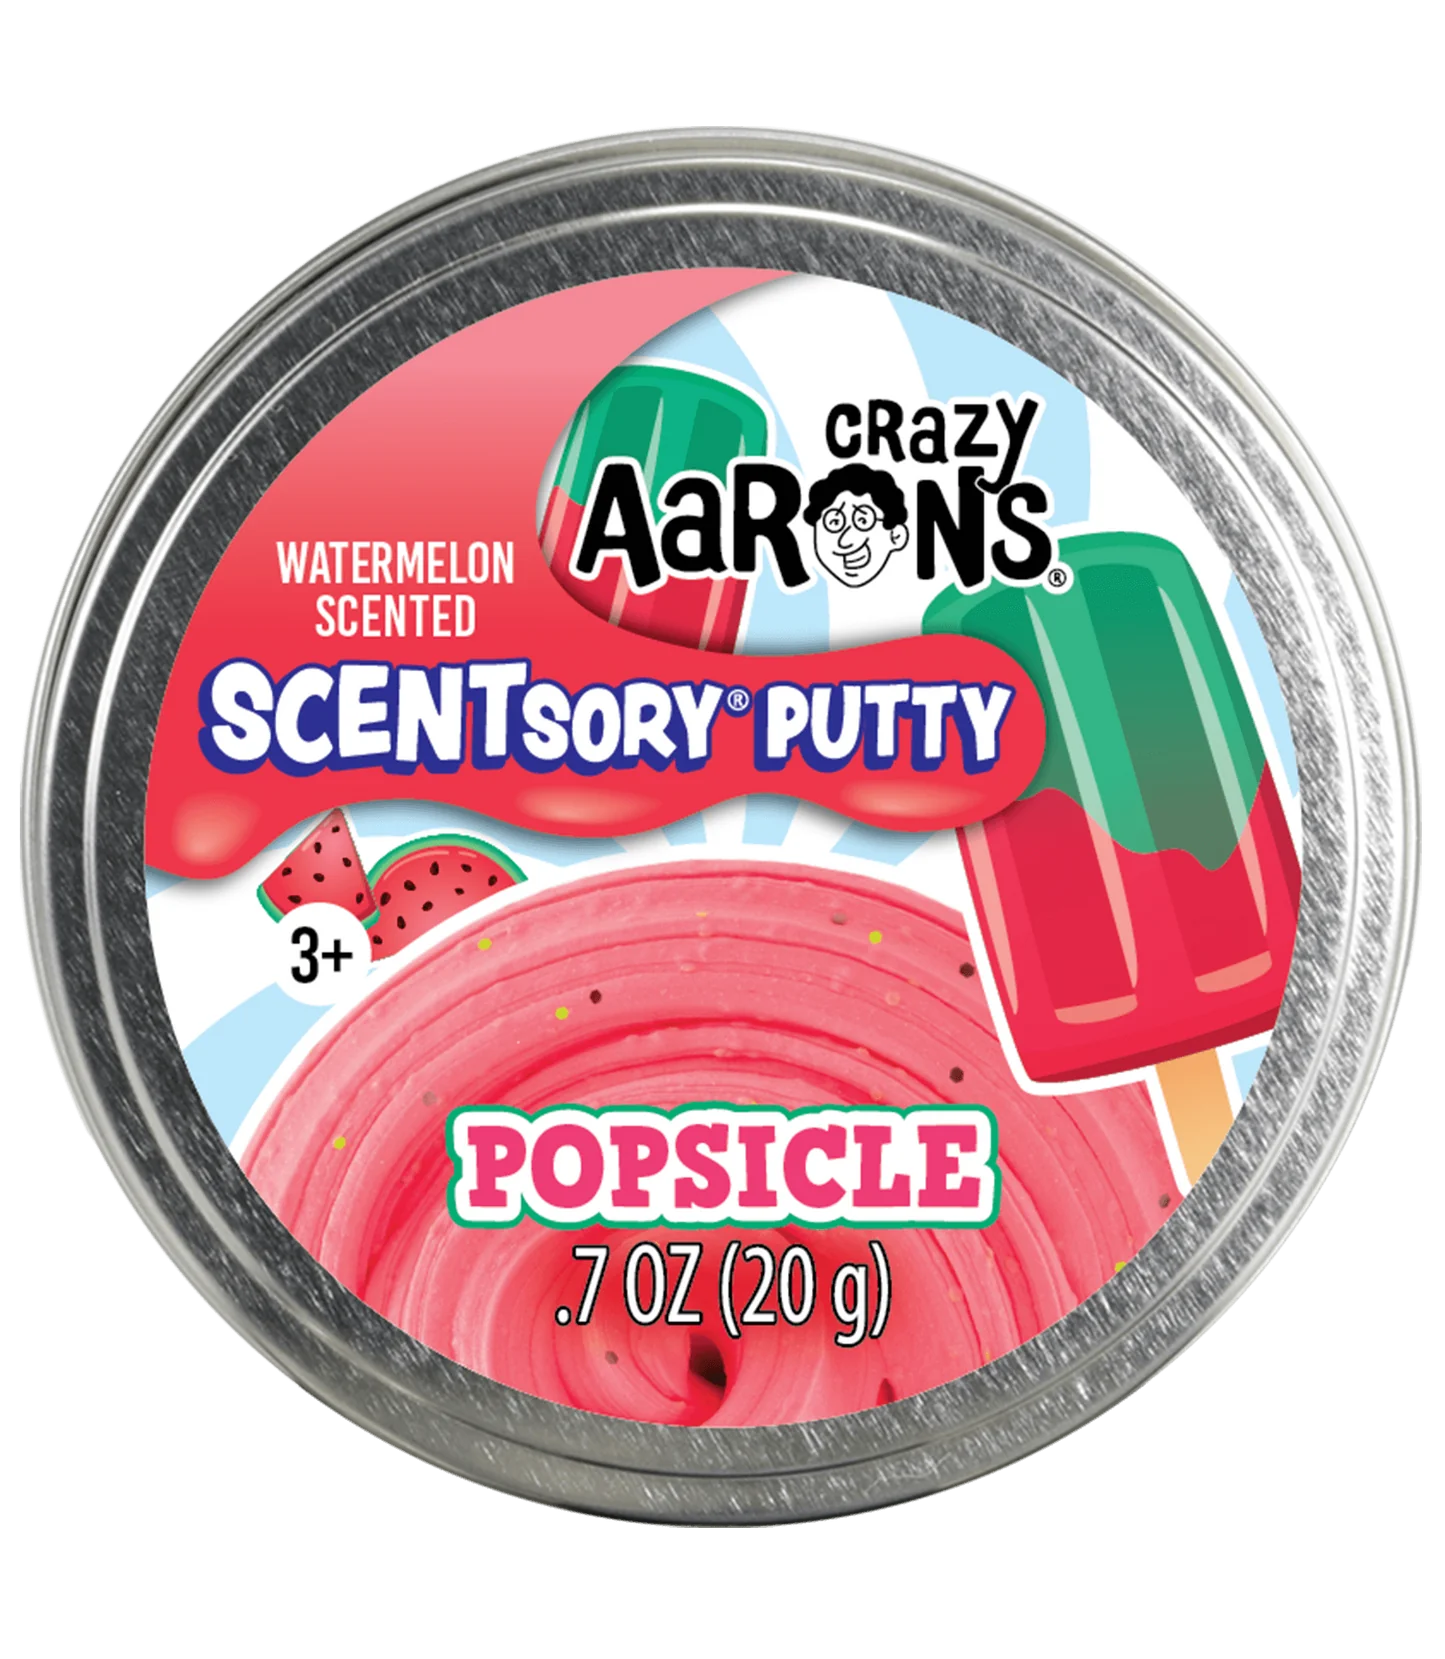 Crazy Aarons Popsicle Scentsory